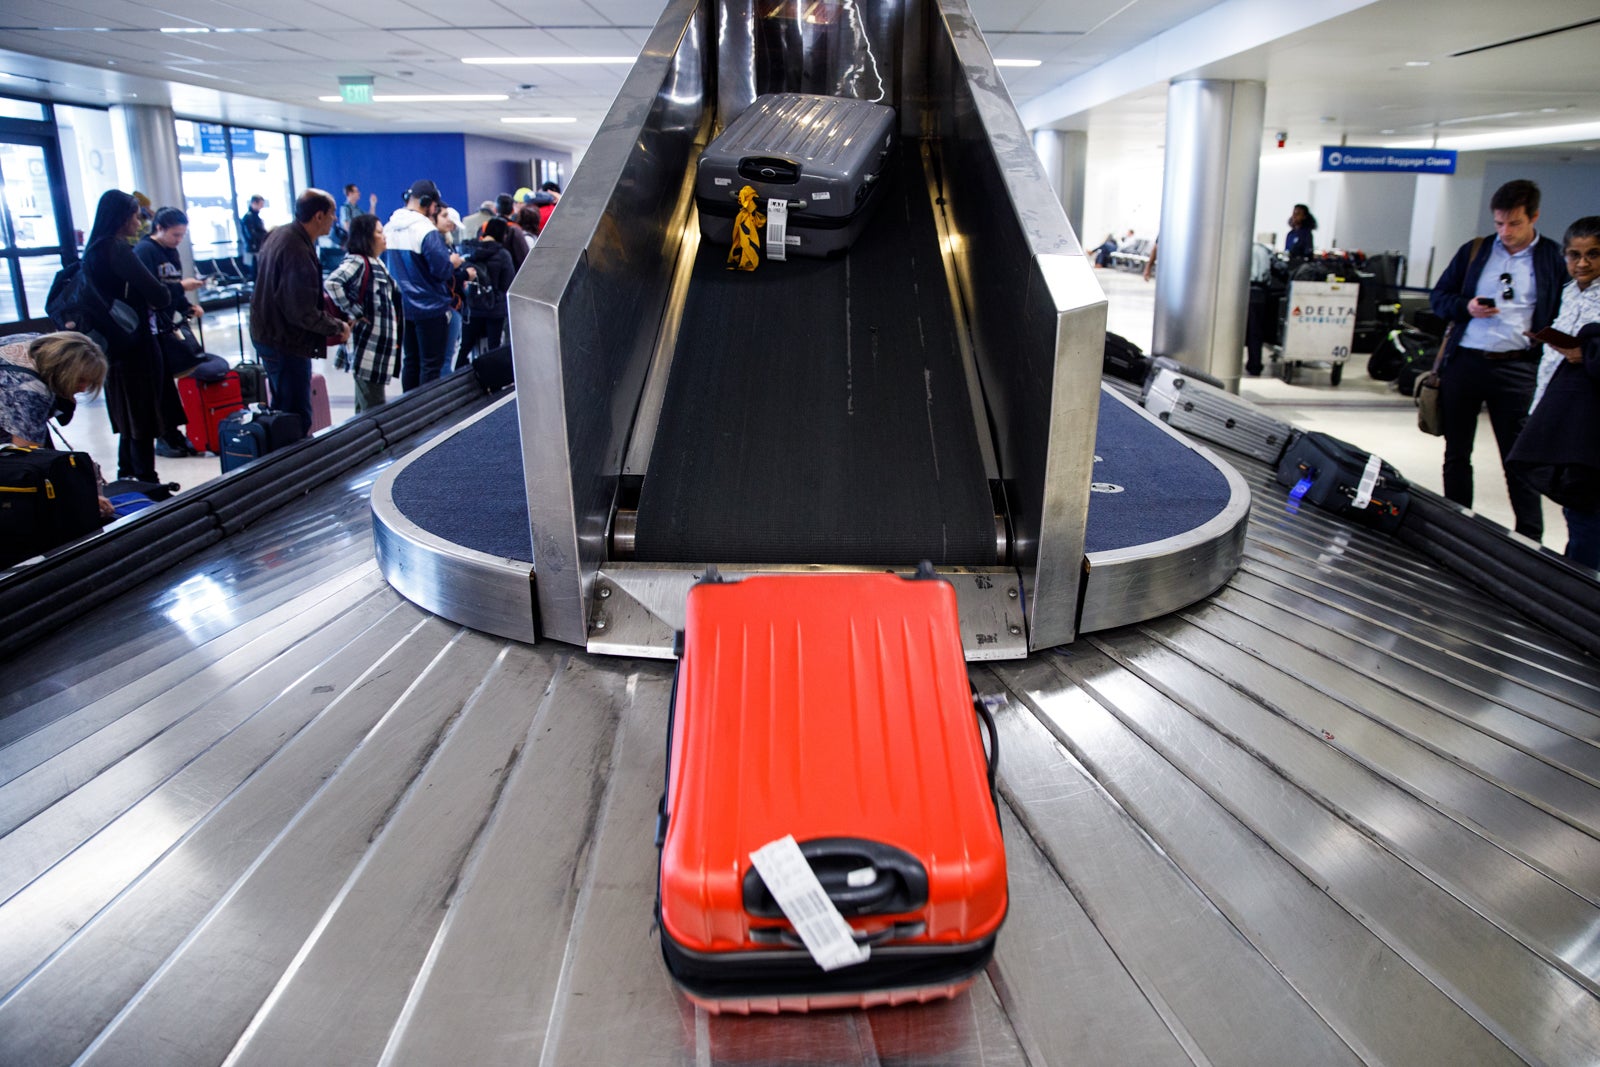 Checked baggage. Fee or free? Learn more here